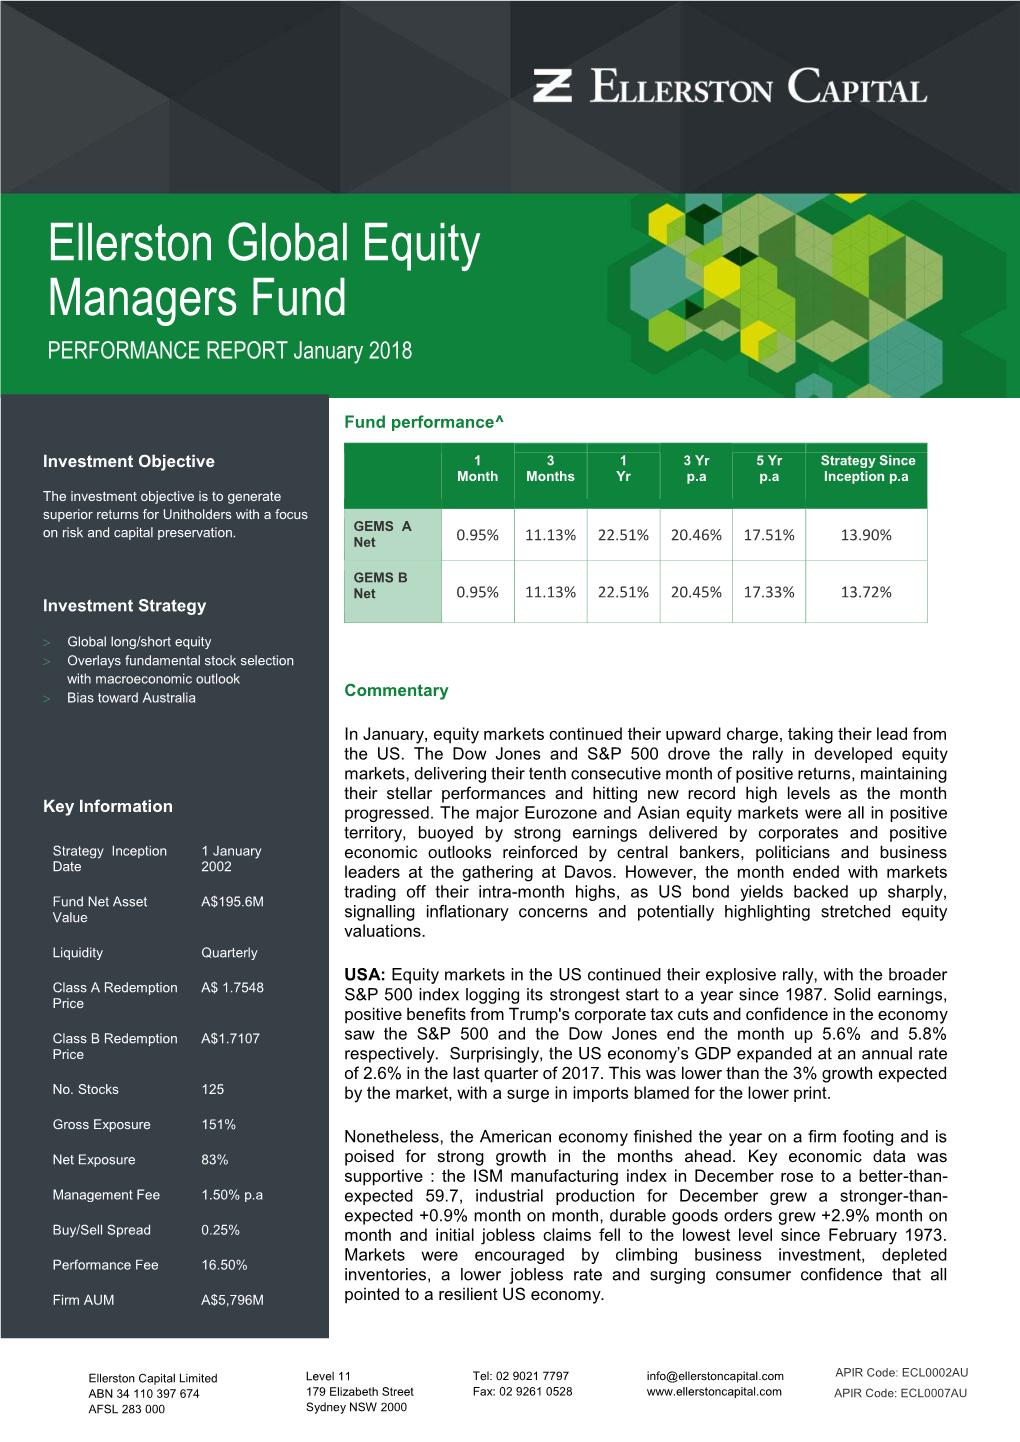 Ellerston Global Equity Managers Fund PERFORMANCE REPORT January 2018